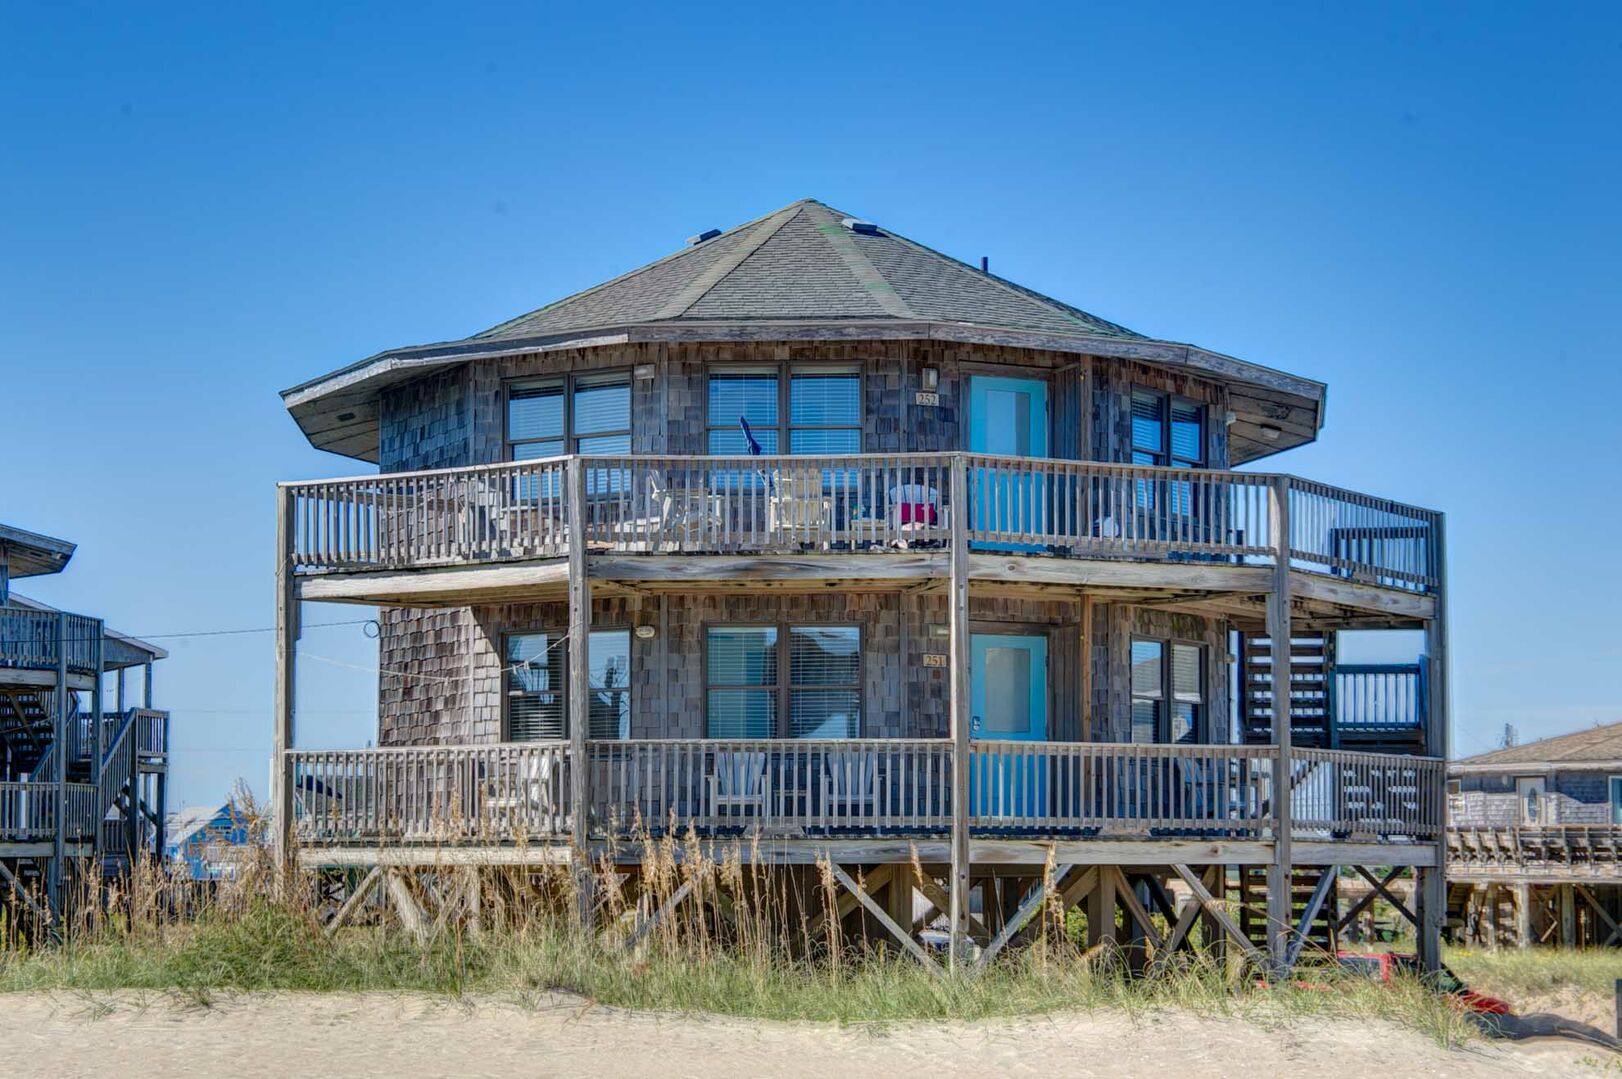 The unique round facade of one of our Hatteras Island vacation home rentals